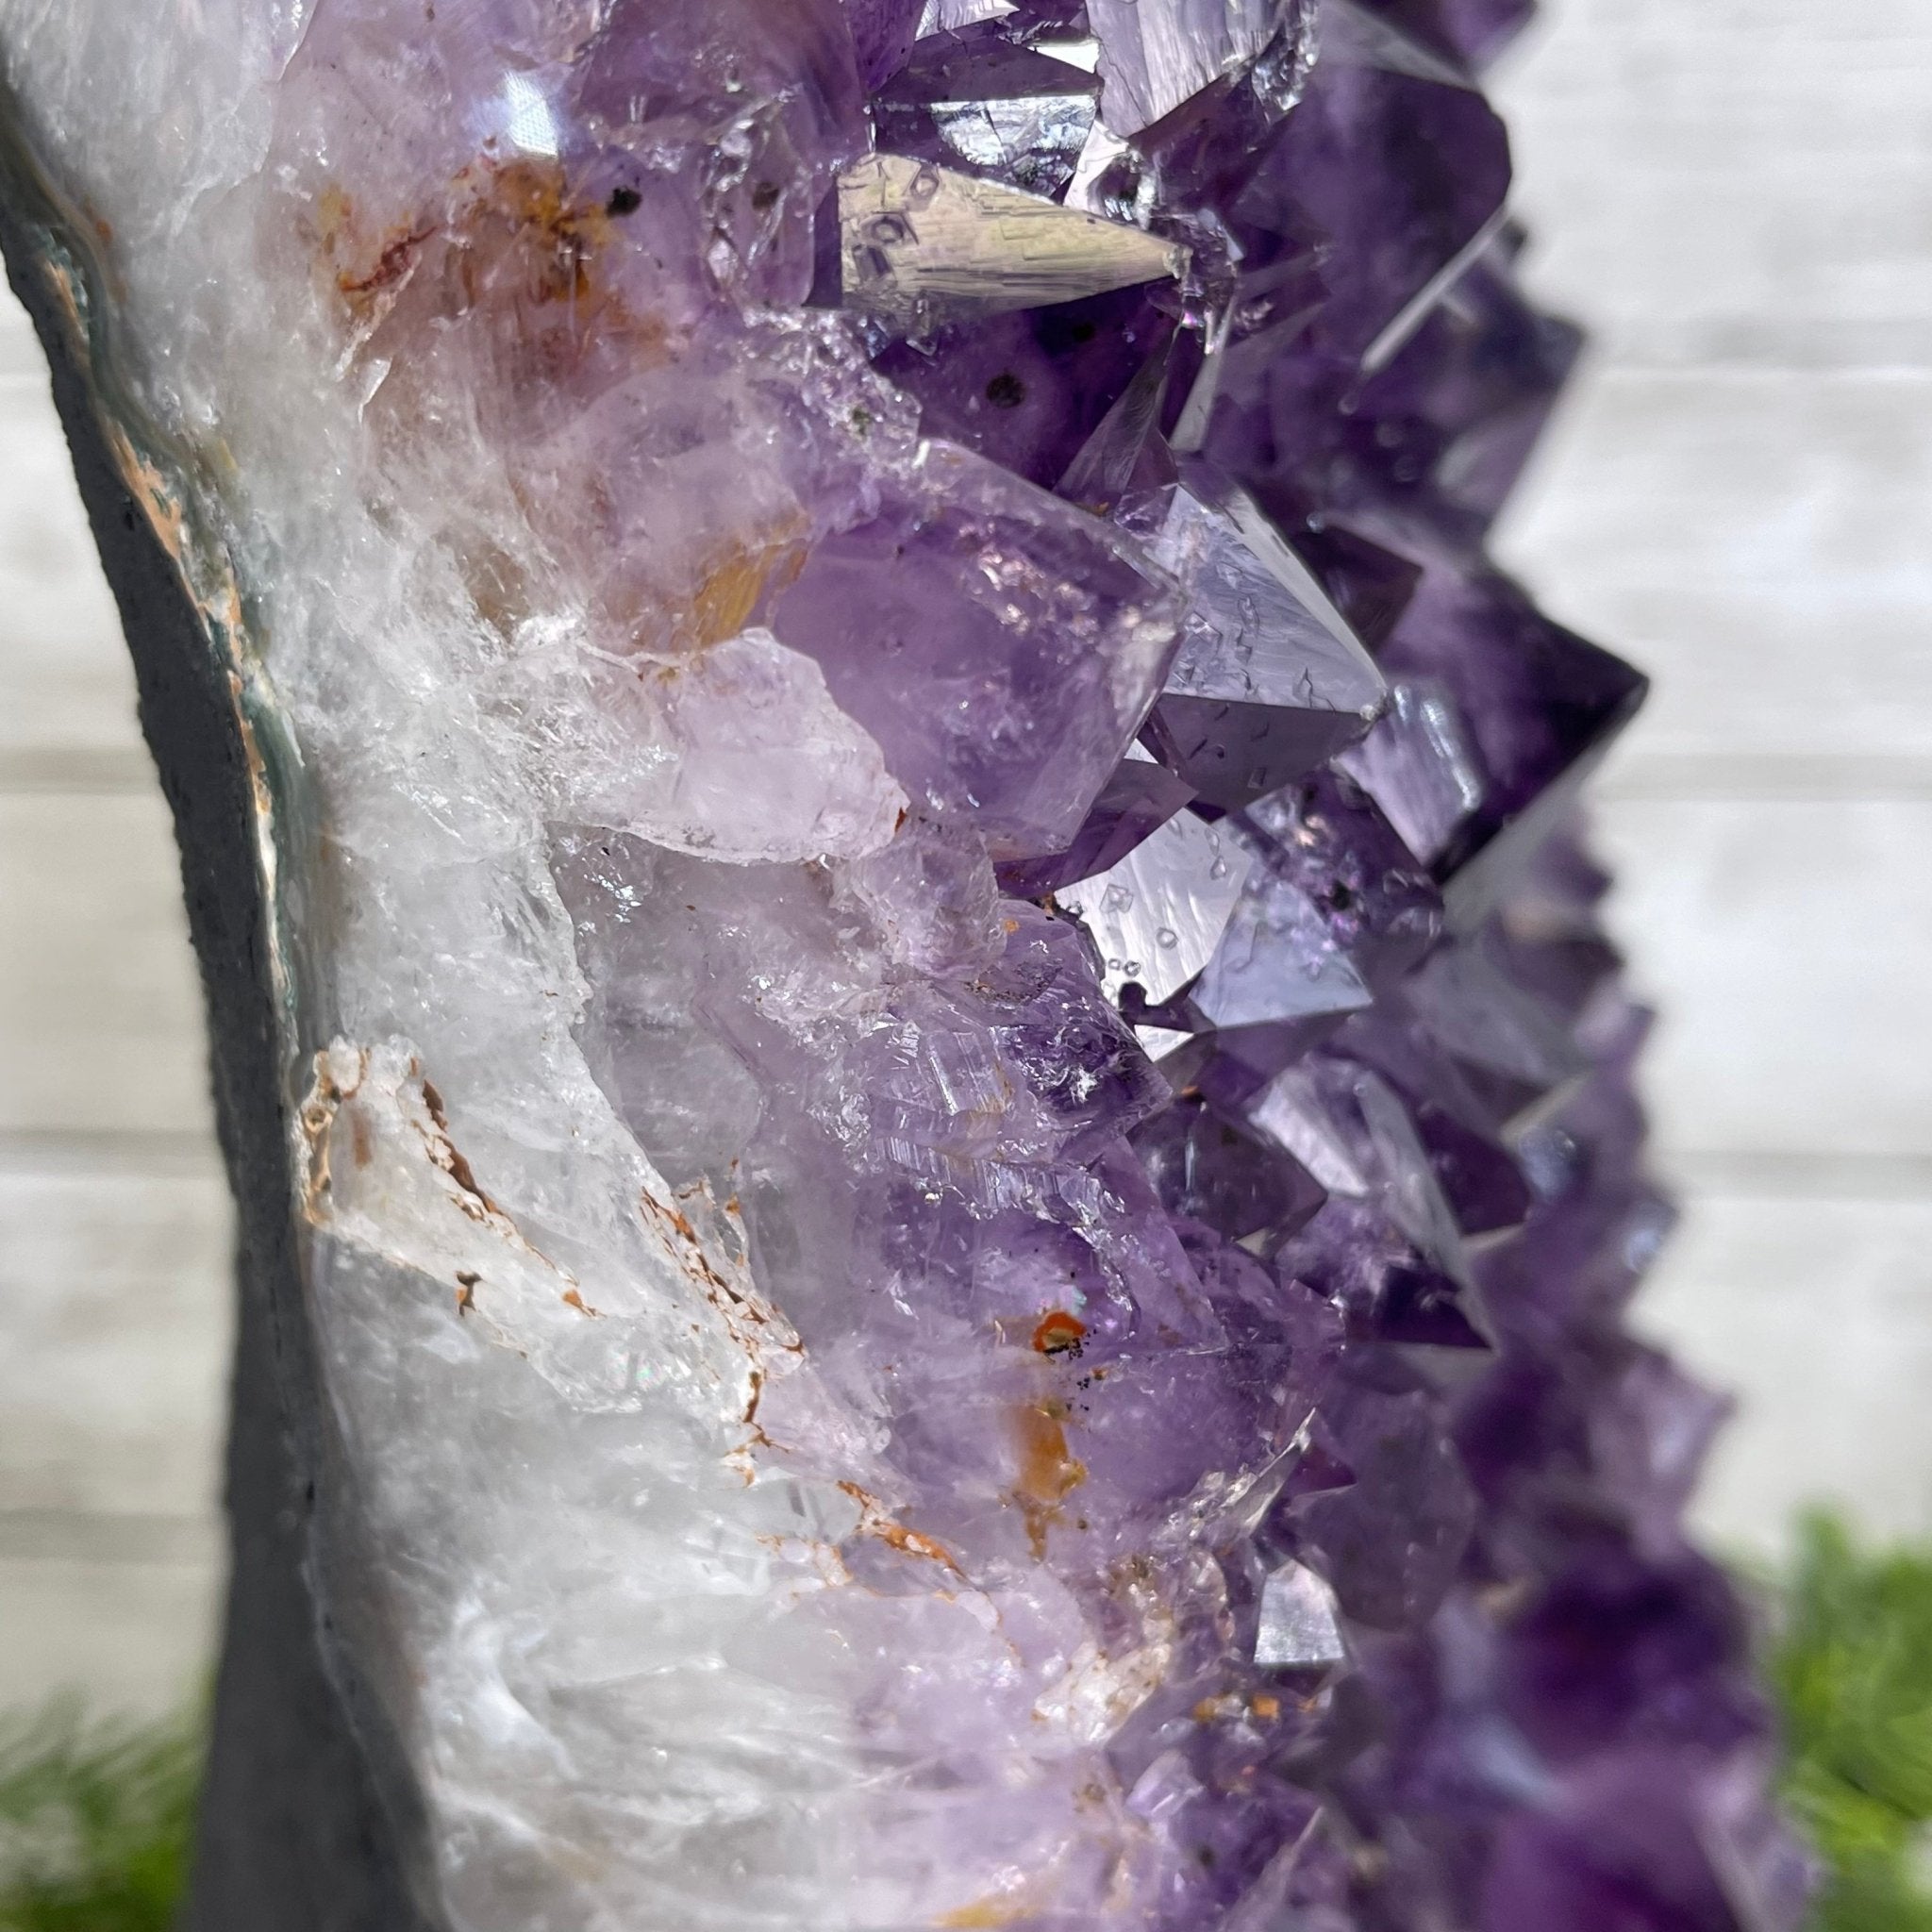 Extra Quality Amethyst Druse Cluster on Cement Base, 27.3 lbs and 12.4" Tall #5614-0072 - Brazil GemsBrazil GemsExtra Quality Amethyst Druse Cluster on Cement Base, 27.3 lbs and 12.4" Tall #5614-0072Clusters on Cement Bases5614-0072